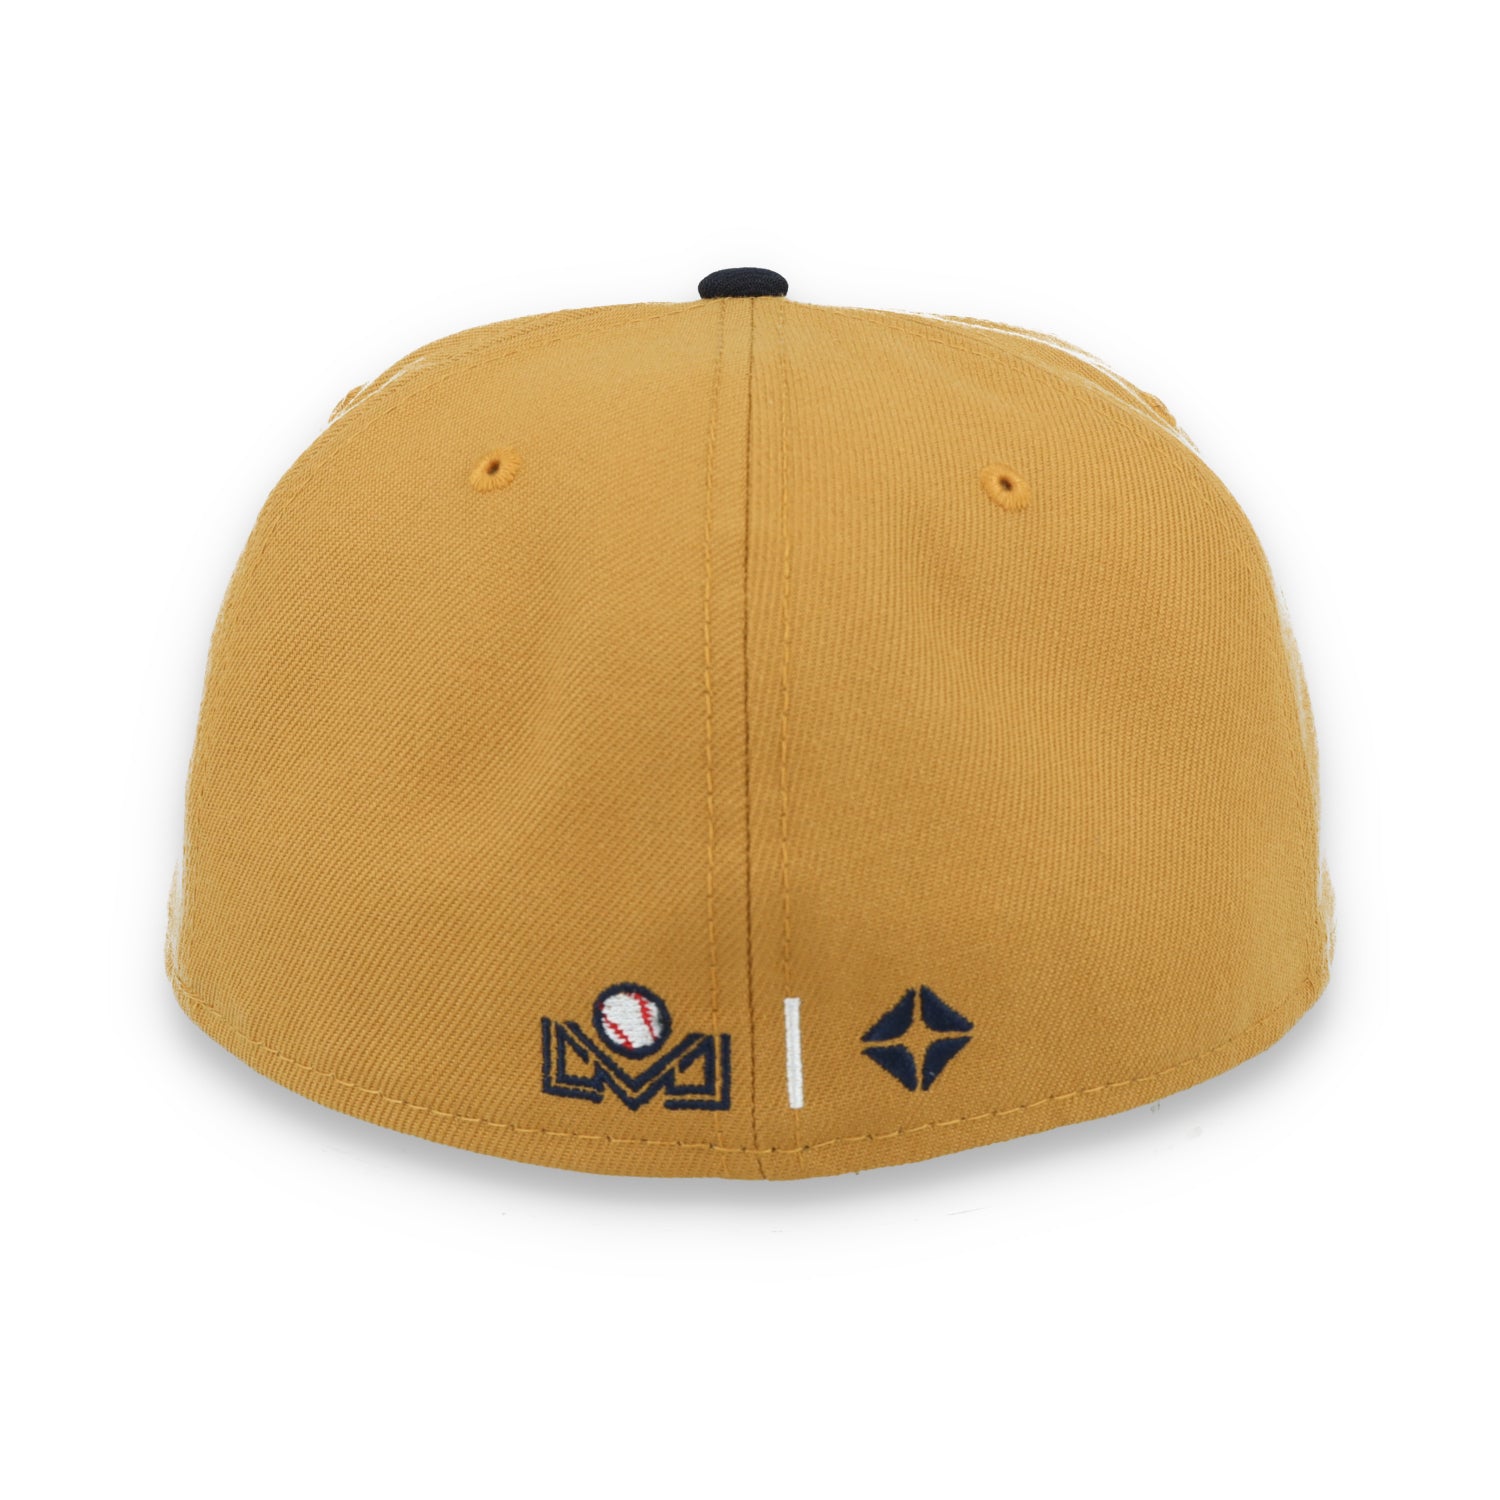 New Era Charros De Jalisco LMP 59FIFTY Fitted Hat-Brown/Navy